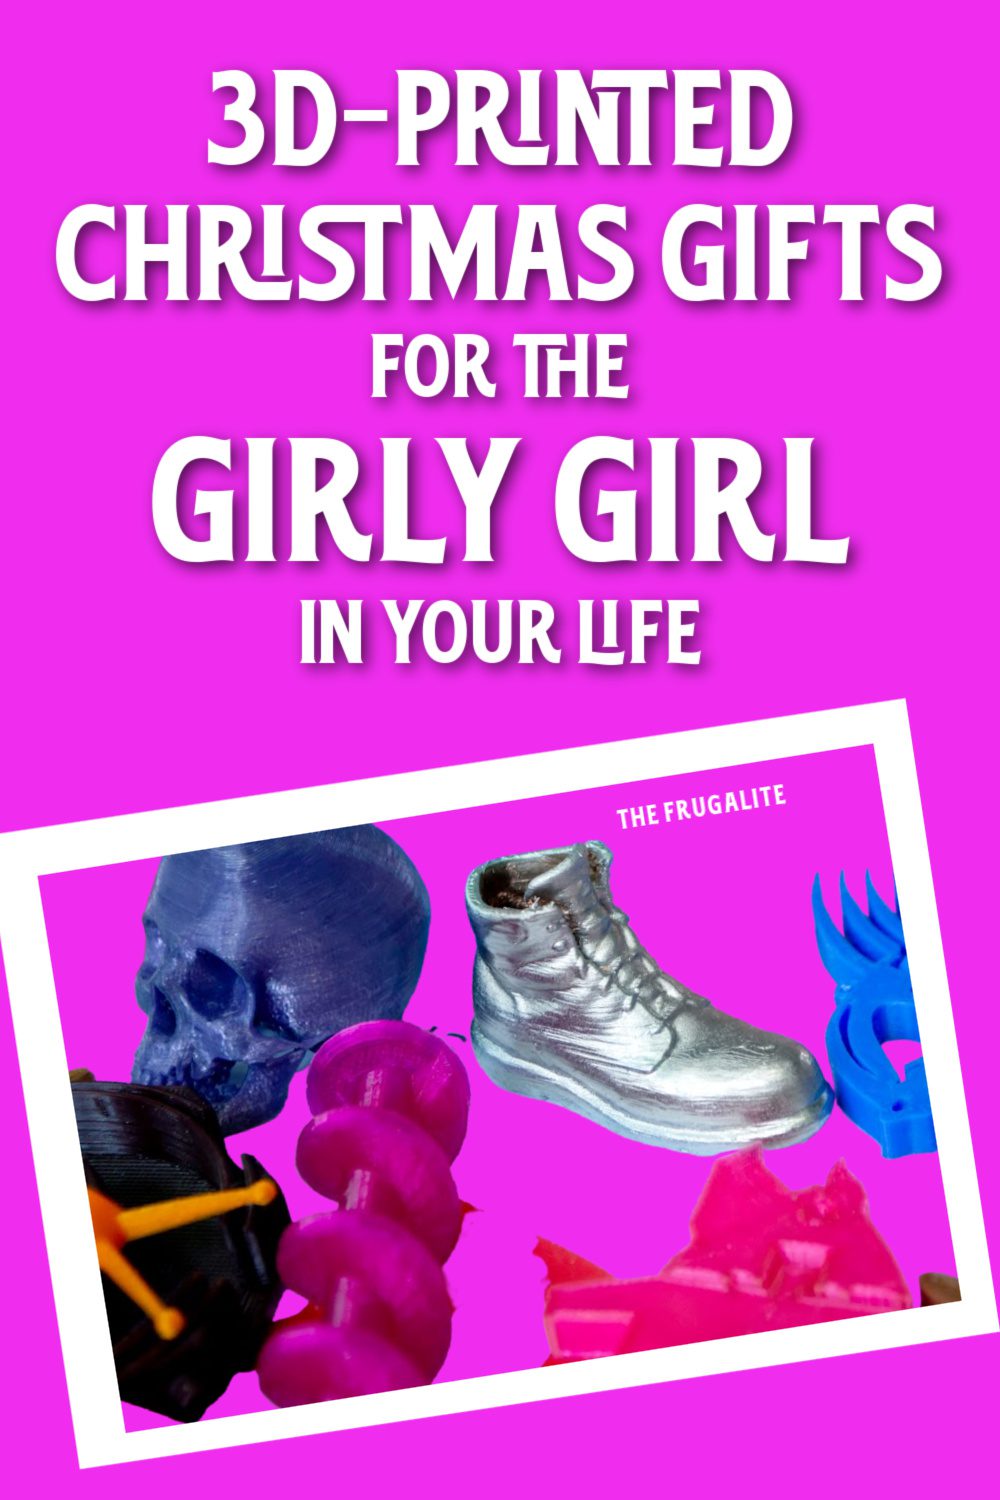 3D-Printed Christmas Gifts for the Girly Girl in Your Life